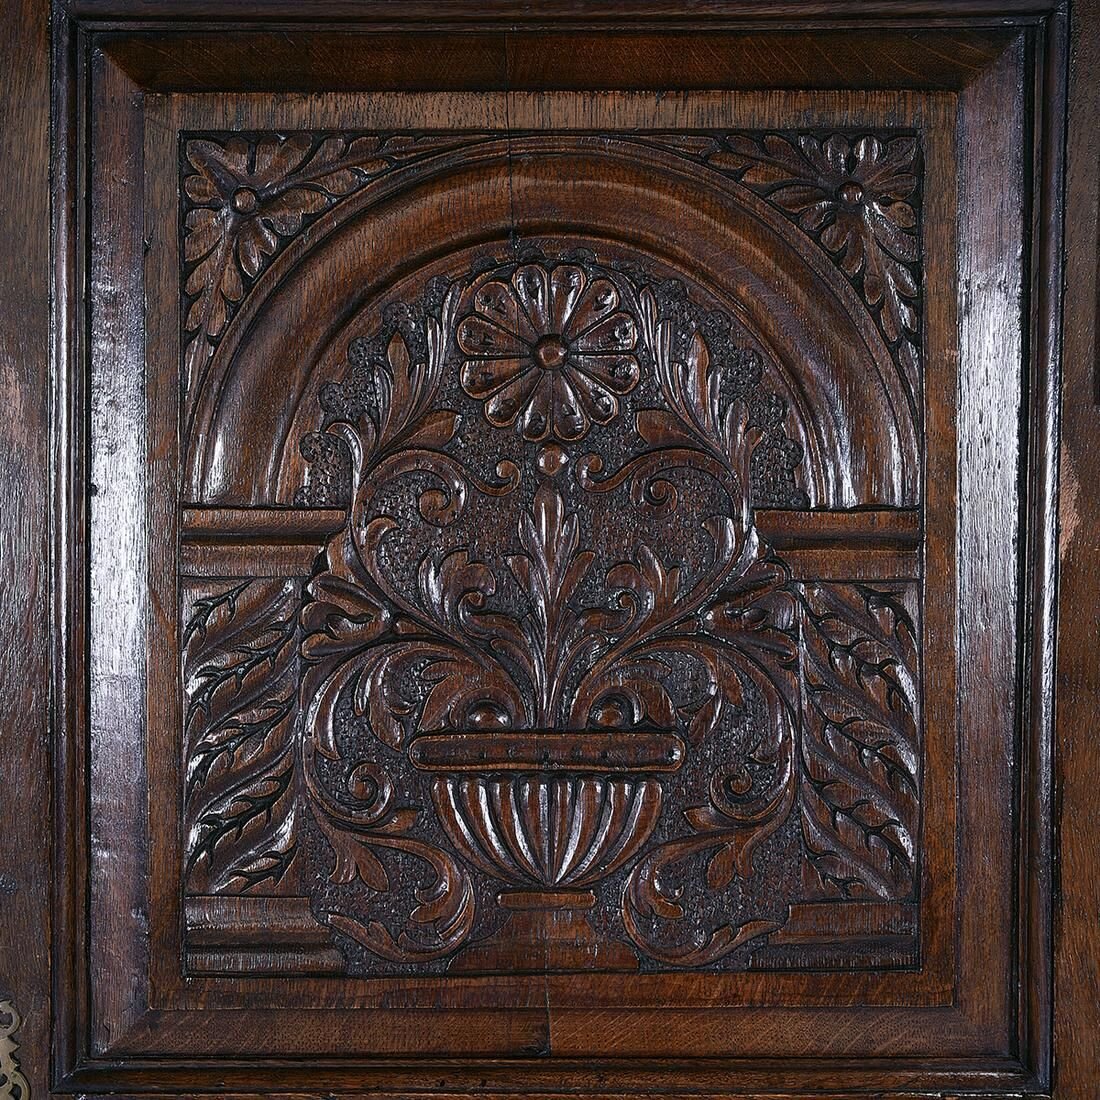 AF3-338: ANTIQUE 17TH CENTRY ENGLISH JACOBEAN HIGHLY CARVED OAK ARMOIRE